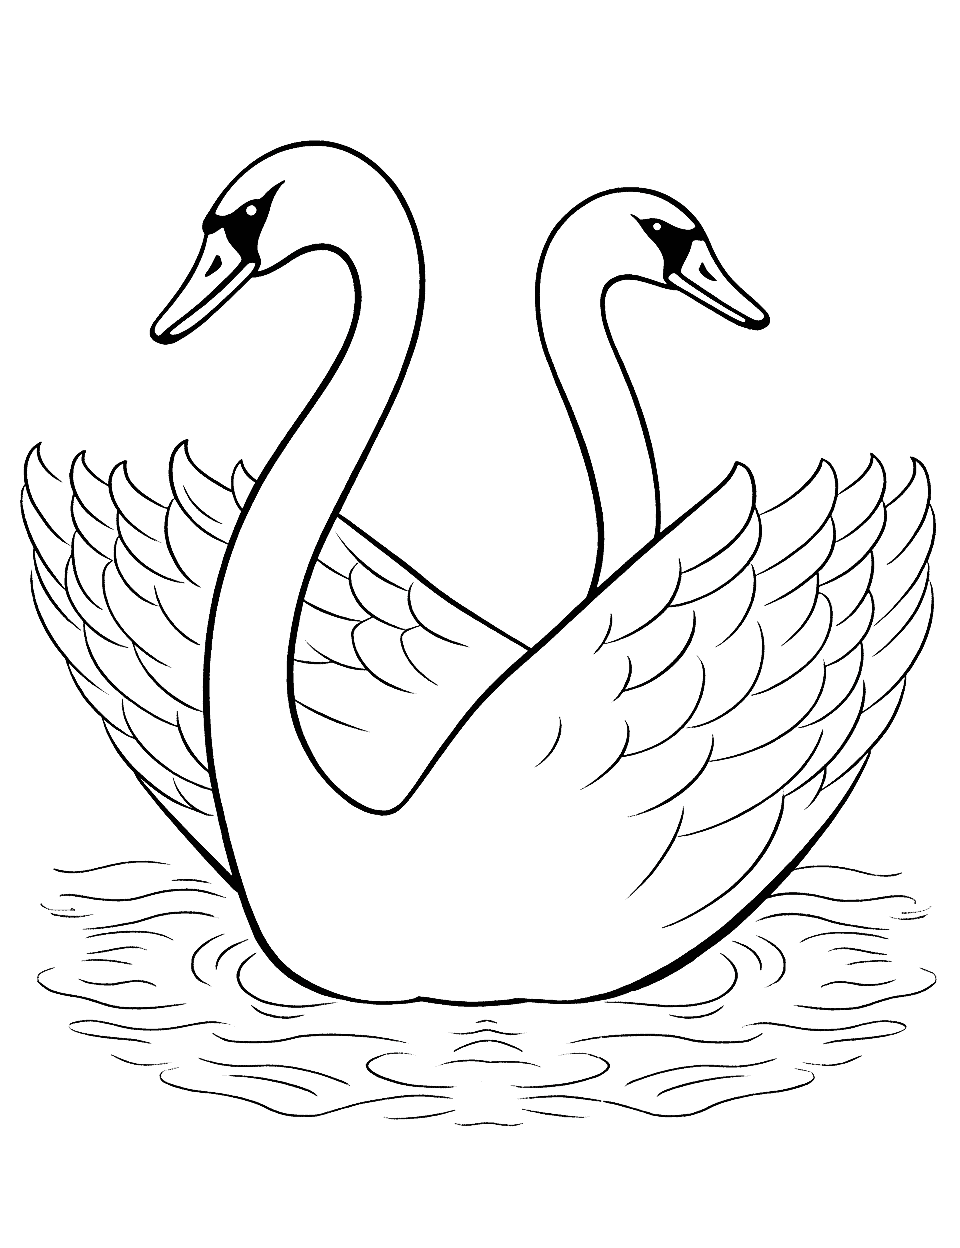 Graceful Swan Pair Animal Coloring Page - A pair of swans swimming together, forming a heart shape with their necks.